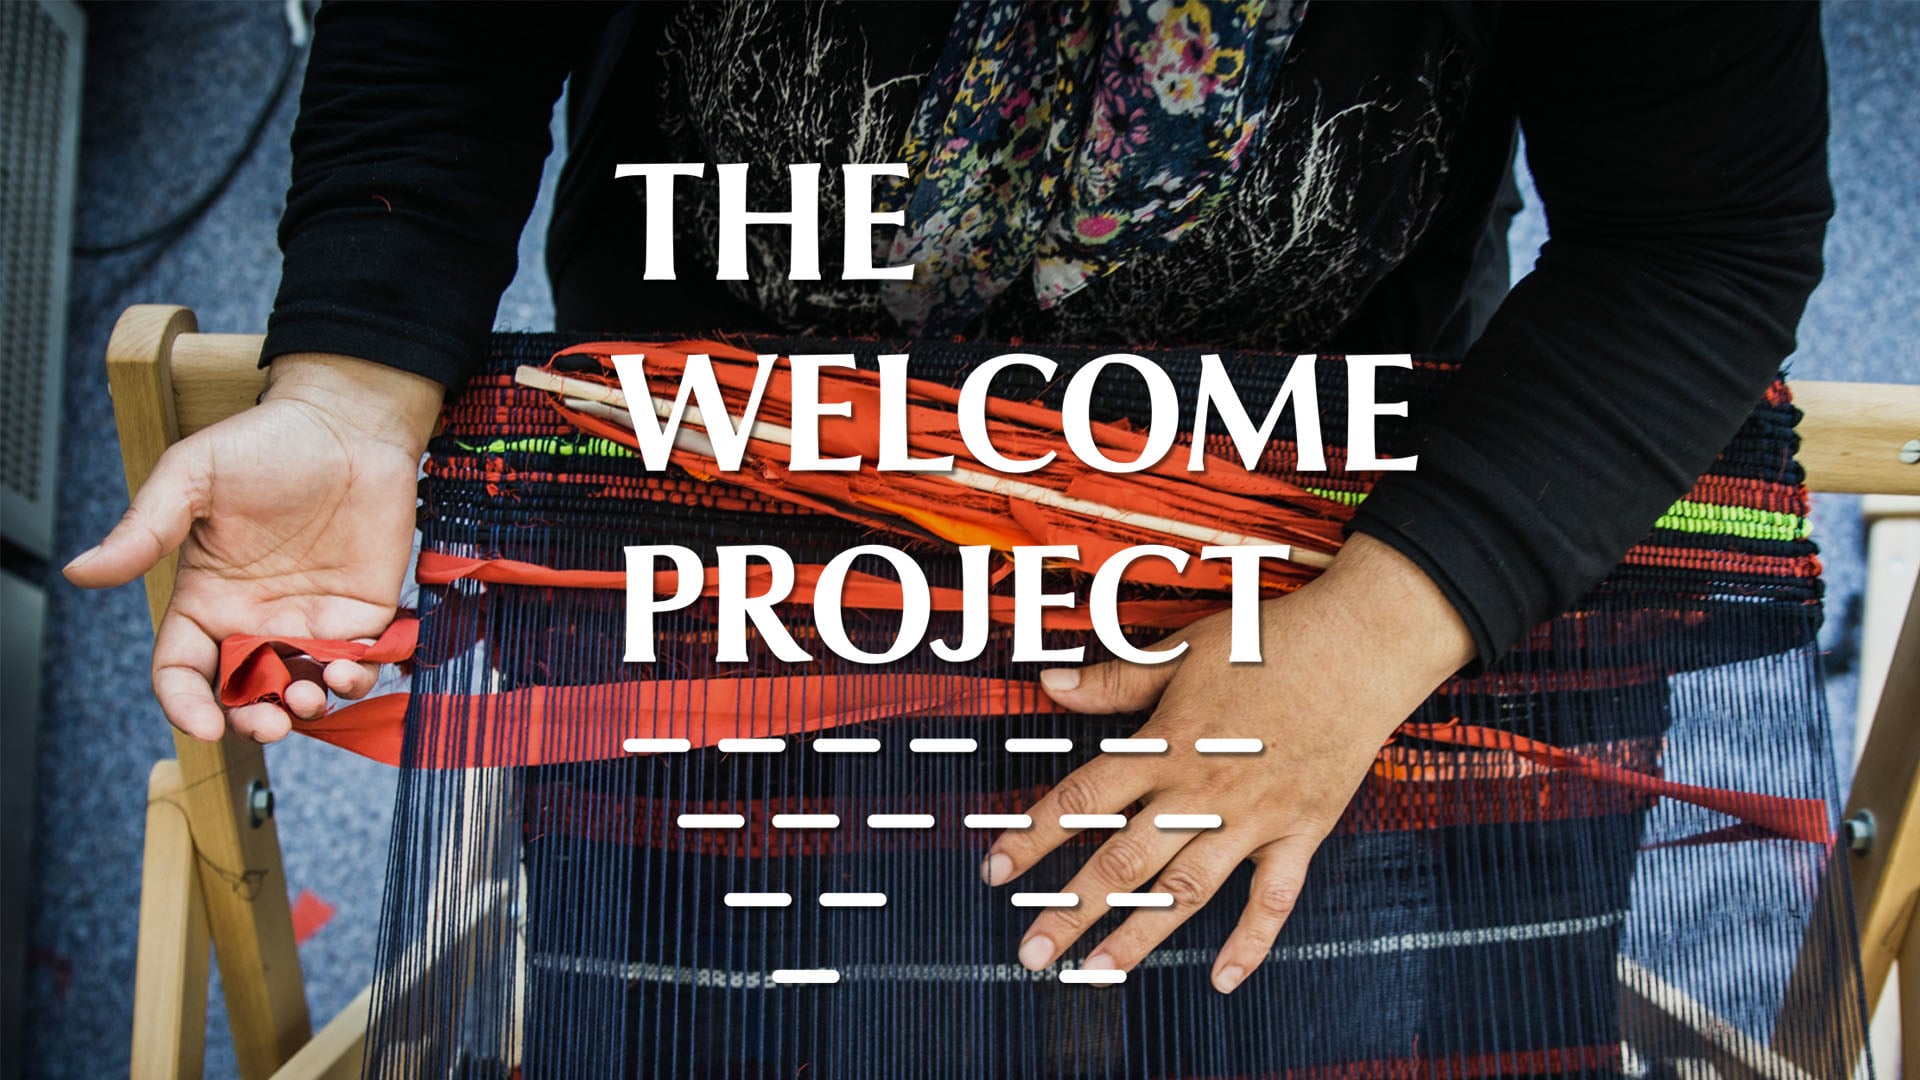 The Welcome Project